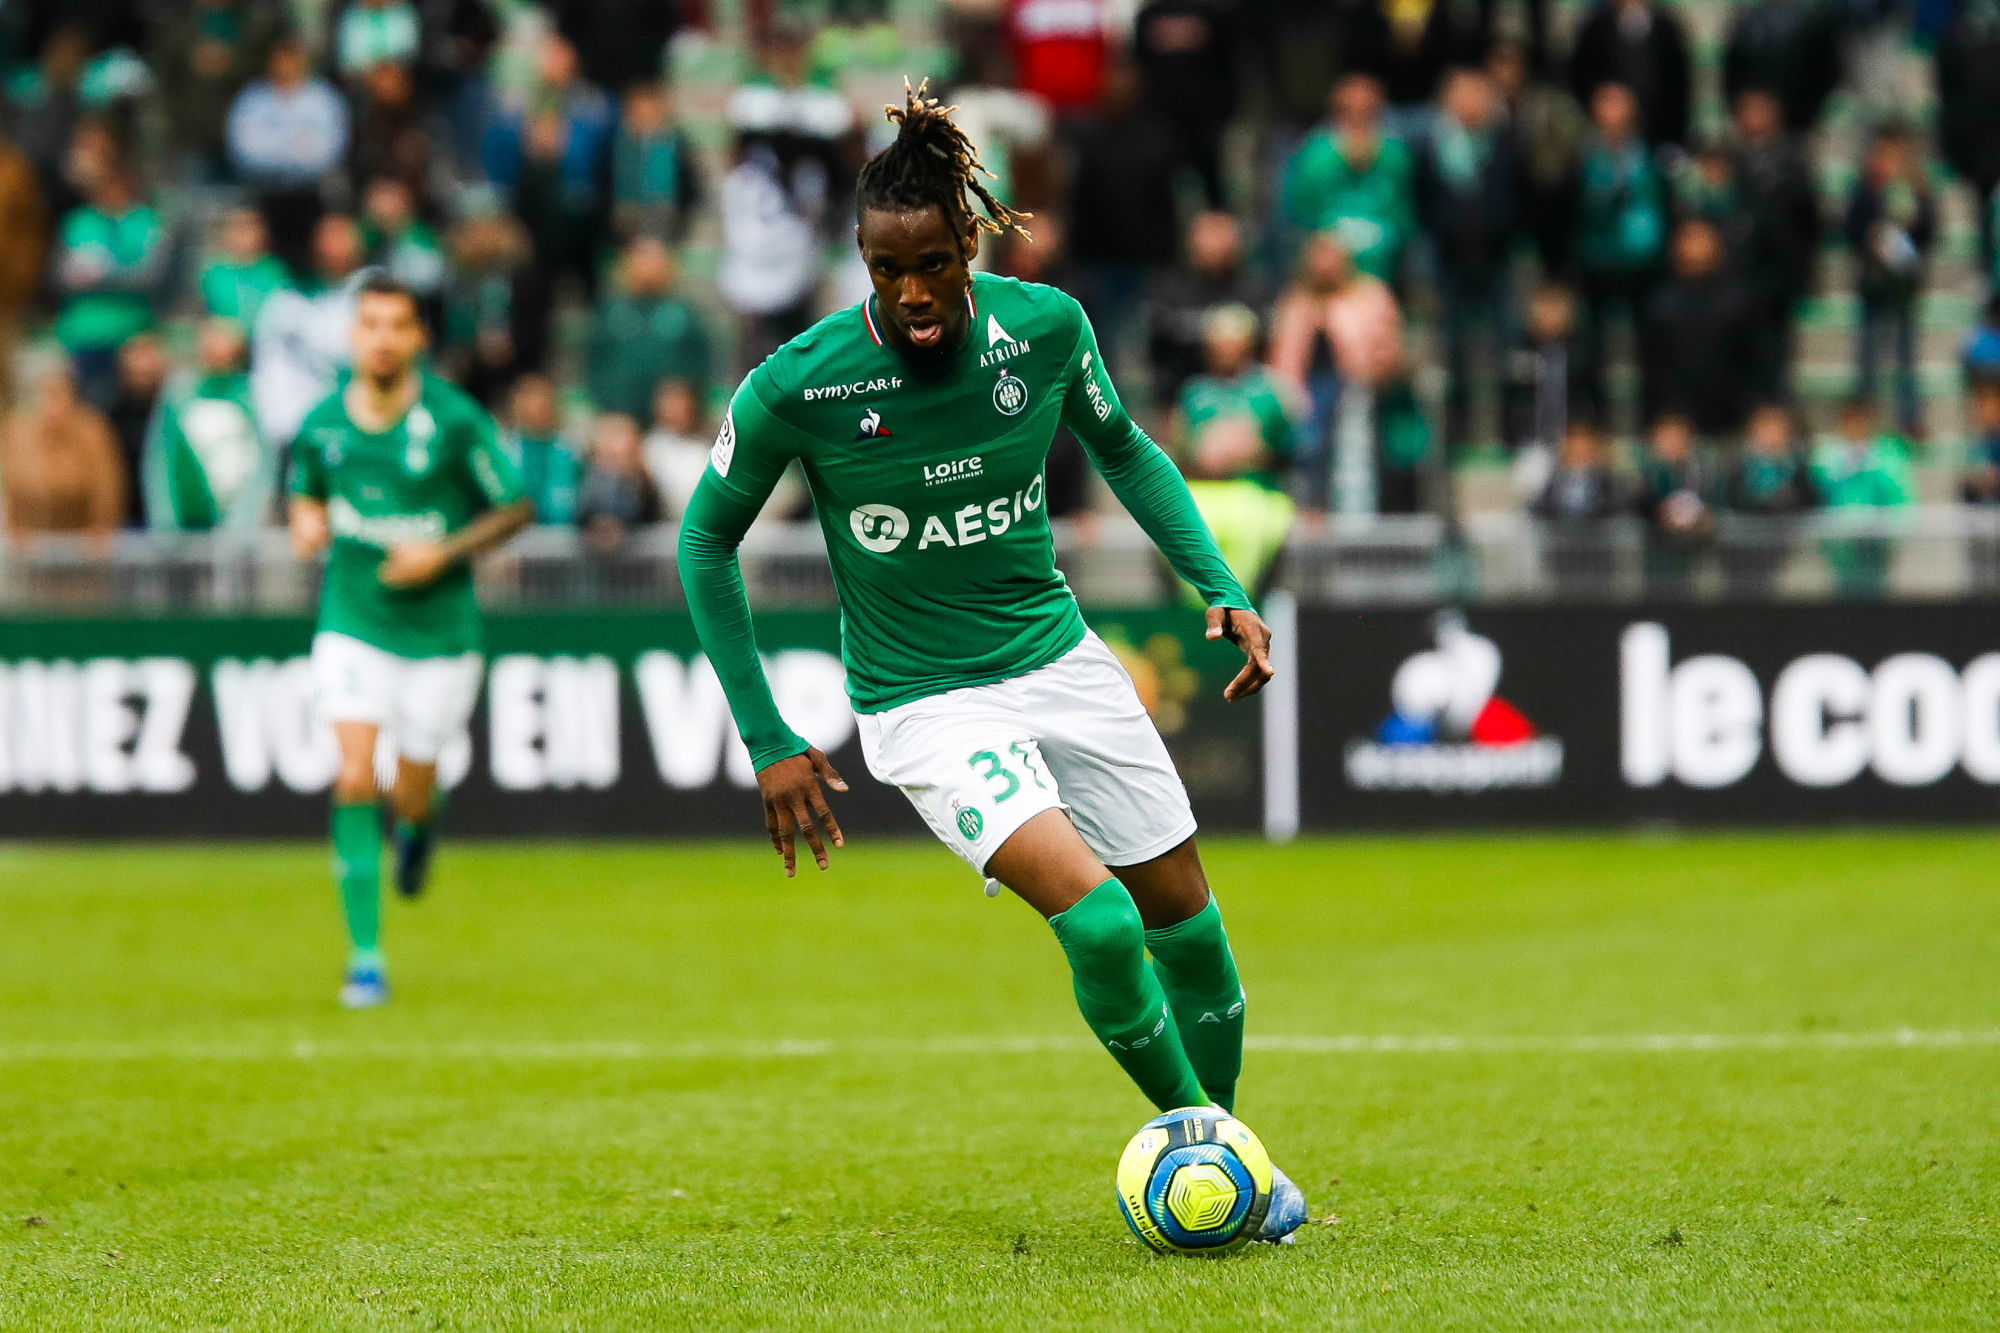 Charles ABI of Saint Etienne during the Ligue 1 match between Saint-Etienne and Bordeaux at Stade Geoffroy-Guichard on March 8, 2020 in Saint-Etienne, France. (Photo by Romain Biard/Icon Sport) - Charles ABI - Stade Geoffroy-Guichard - Saint Etienne (France)